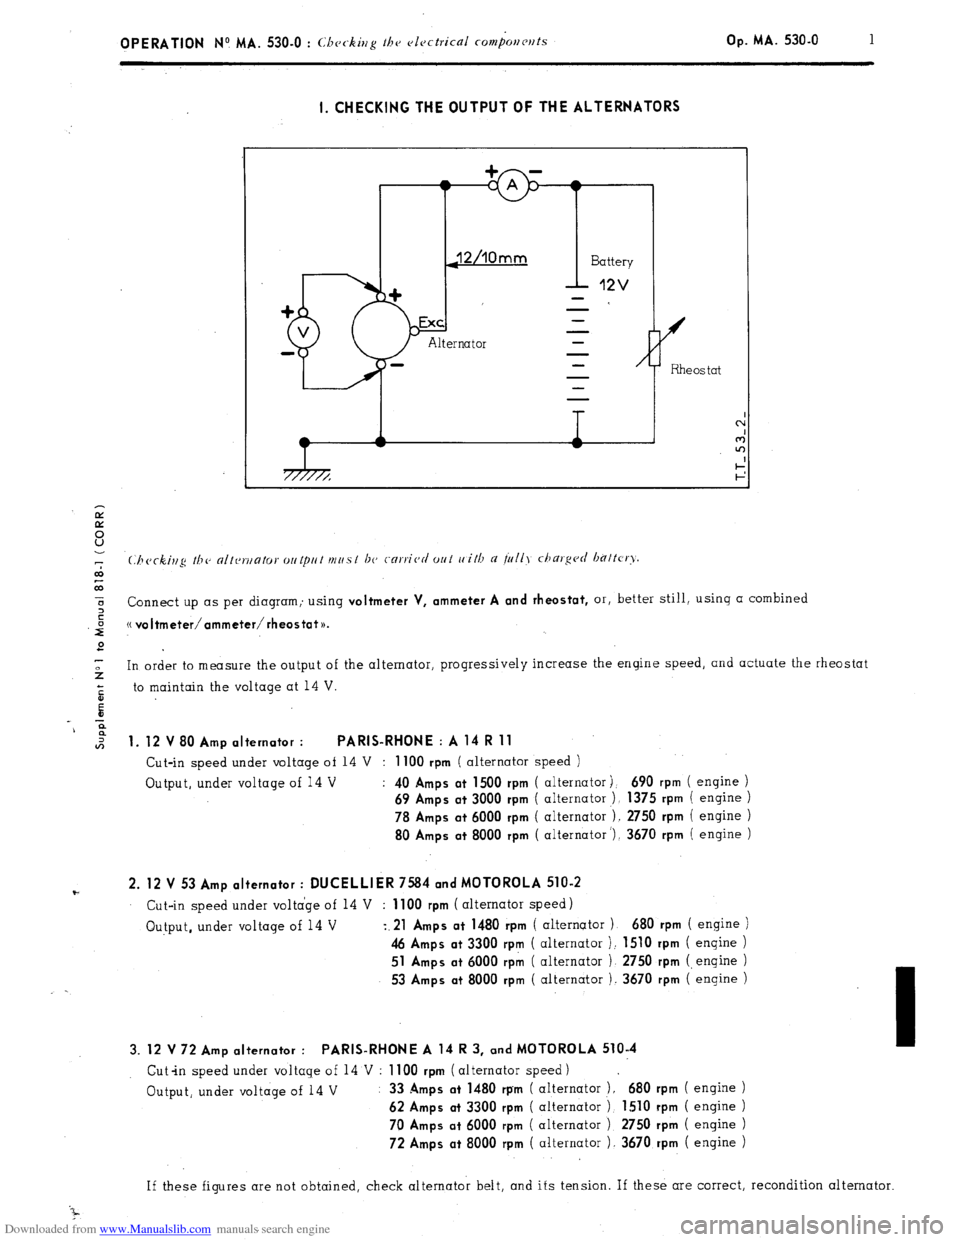 Citroen CX 1984 1.G Workshop Manual Downloaded from www.Manualslib.com manuals search engine OPERATION N9 MA. 530.0 : Cbcc-king thv c)lcctrical com&r~cr~ts Op. MA. 530.0 1 
I. CHECKING THE OUTPUT OF THE ALTERNATORS 
7 
co 
co 
5 or, bet